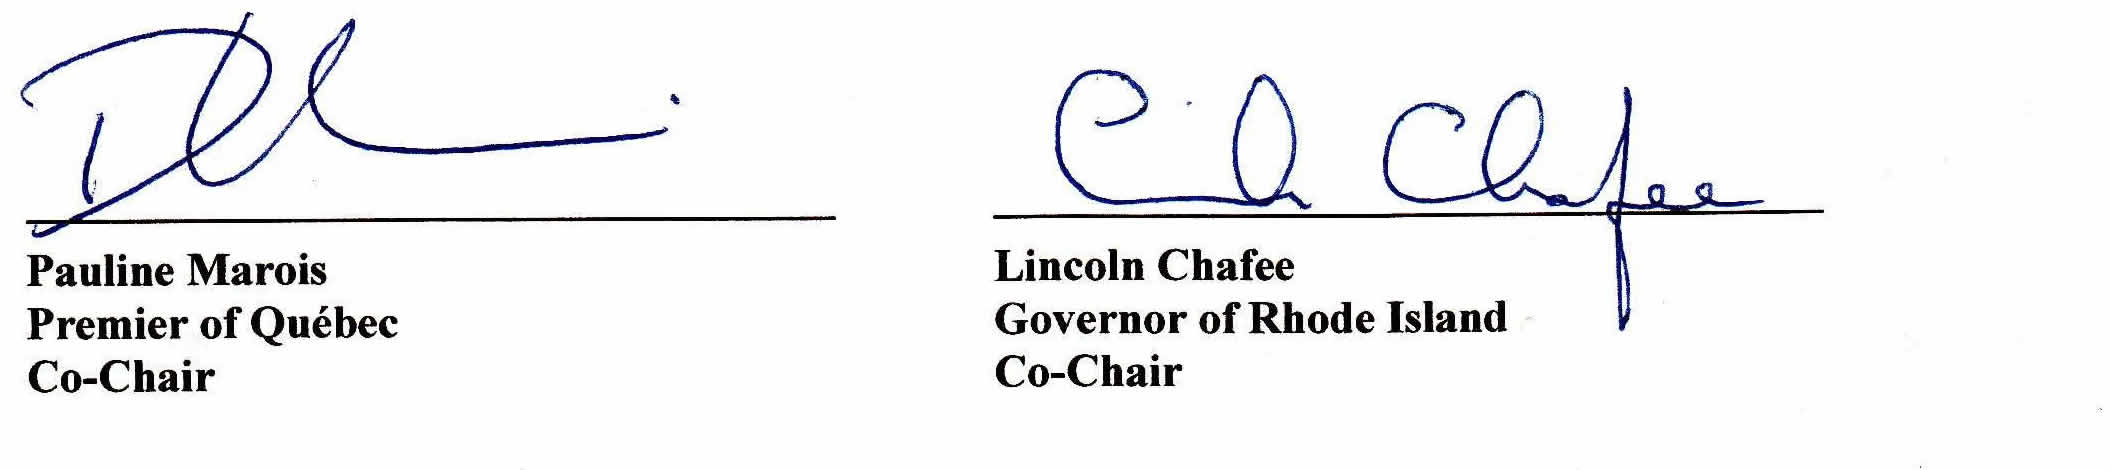 Signature of Pauline Marois, Premier of Québec, Co-Chair and Lincoln Chafee, Governor of Rhode Island, Co-Chair